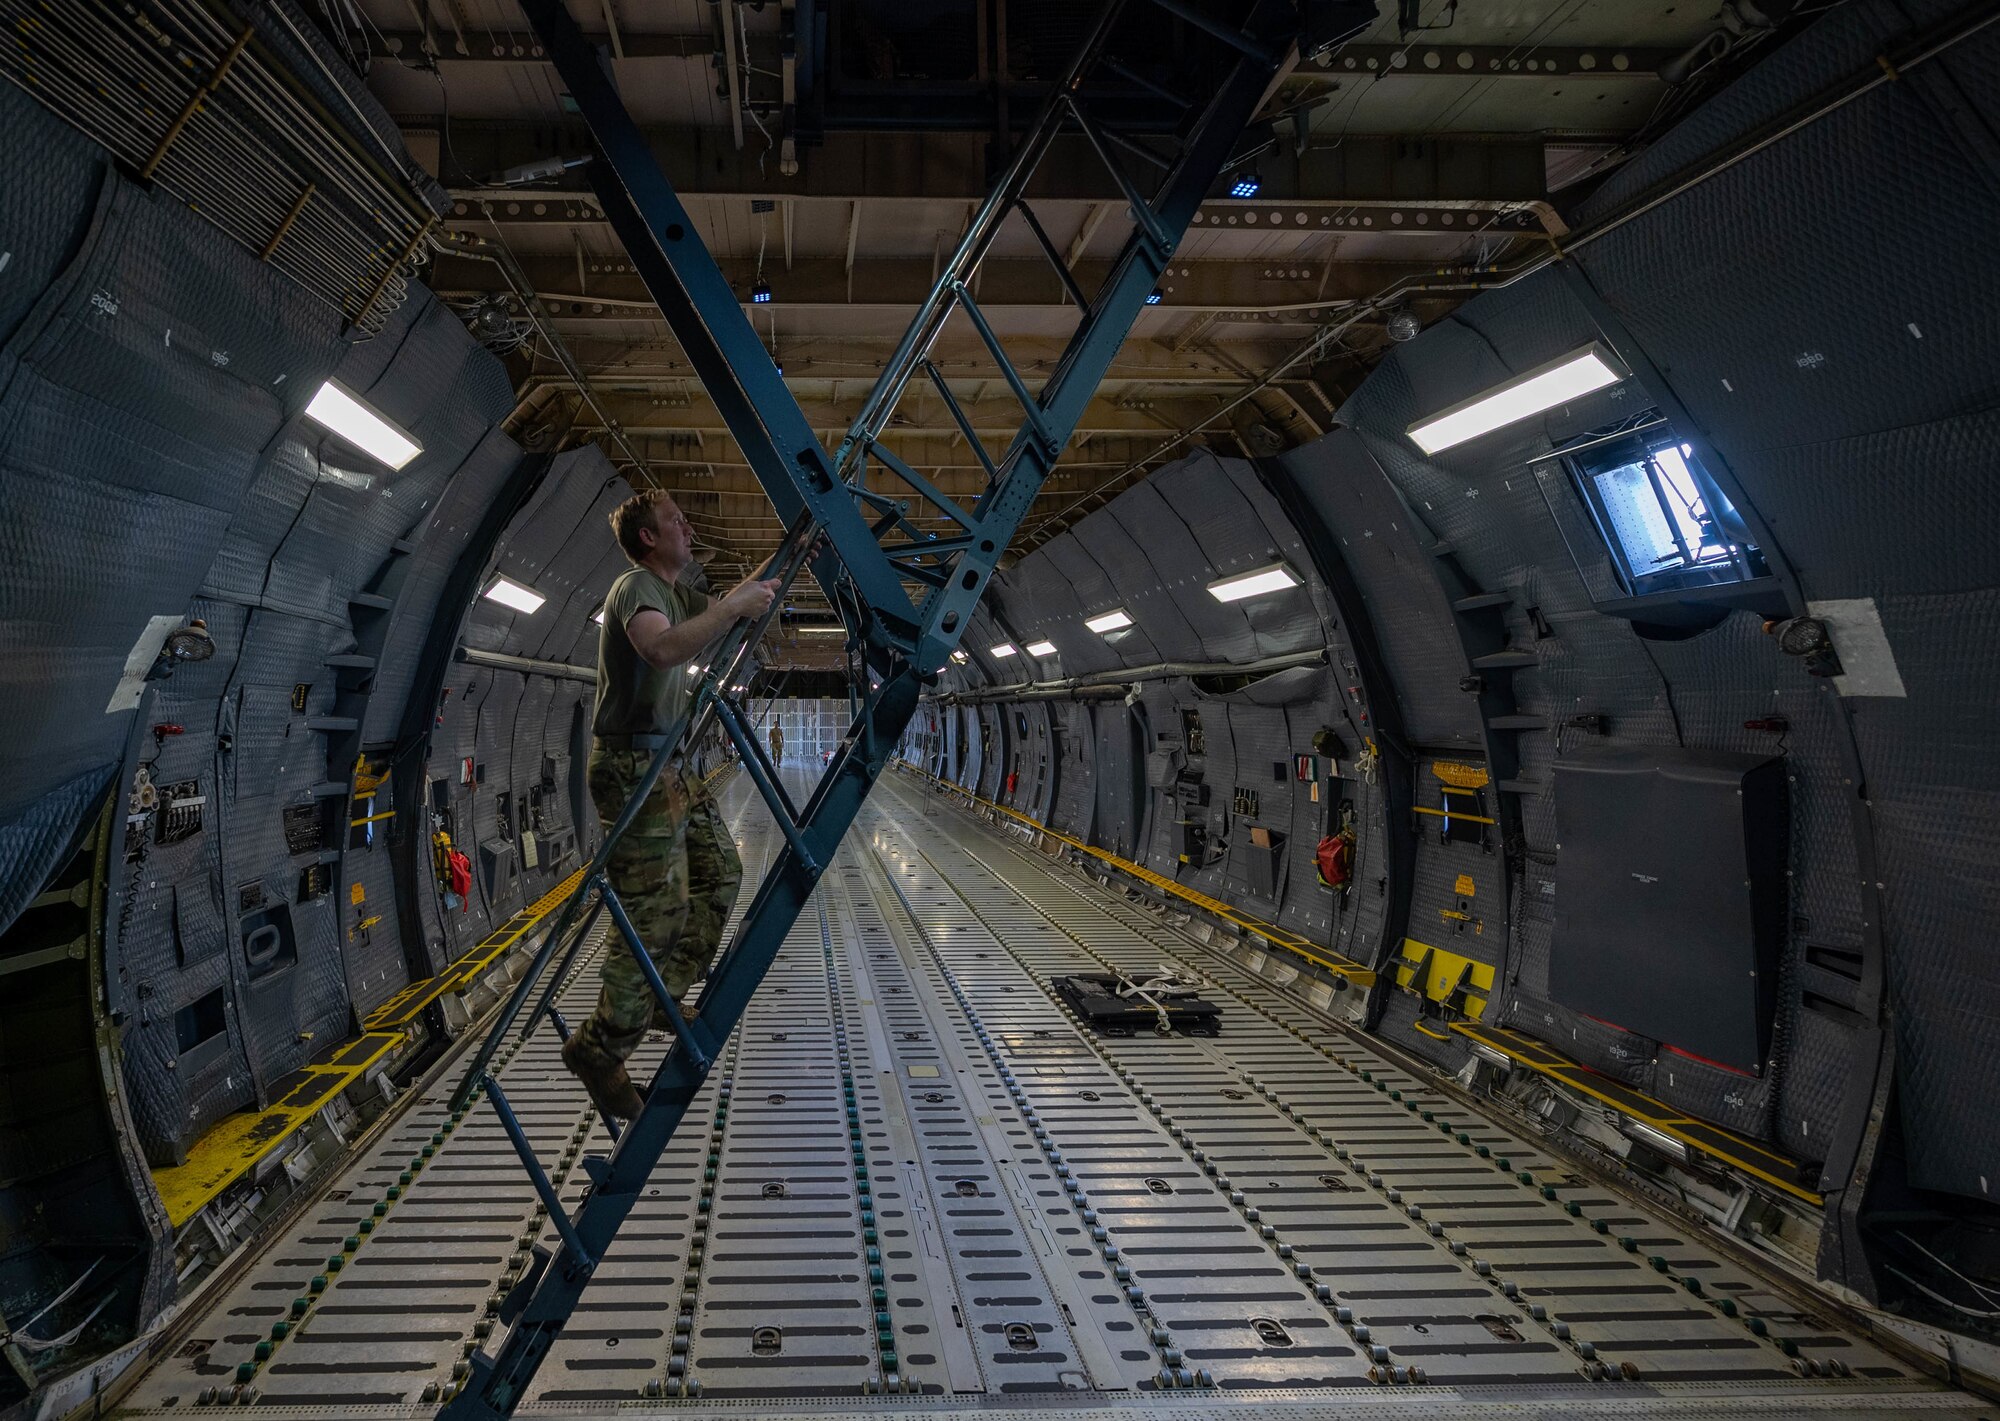 Staff Sgt. Justin Thomas, 9th Airlift Squadron noncommissioned officer in charge of loadmaster training, climbs the troop deck stairs of a Dover Air Force Base C-5M Super Galaxy during a Major Command Service Tail Trainer at Holloman AFB, New Mexico, June 4, 2021. The 9th AS performs MSTTs to expedite upgrade and qualification training for C-5M loadmasters and flight engineers. Of the 350 tasks needed to be a fully qualified loadmaster, roughly half can be completed during an MSTT, reducing the time of training by up to 35 days. (U.S. Air Force photo by Senior Airman Faith Schaefer)